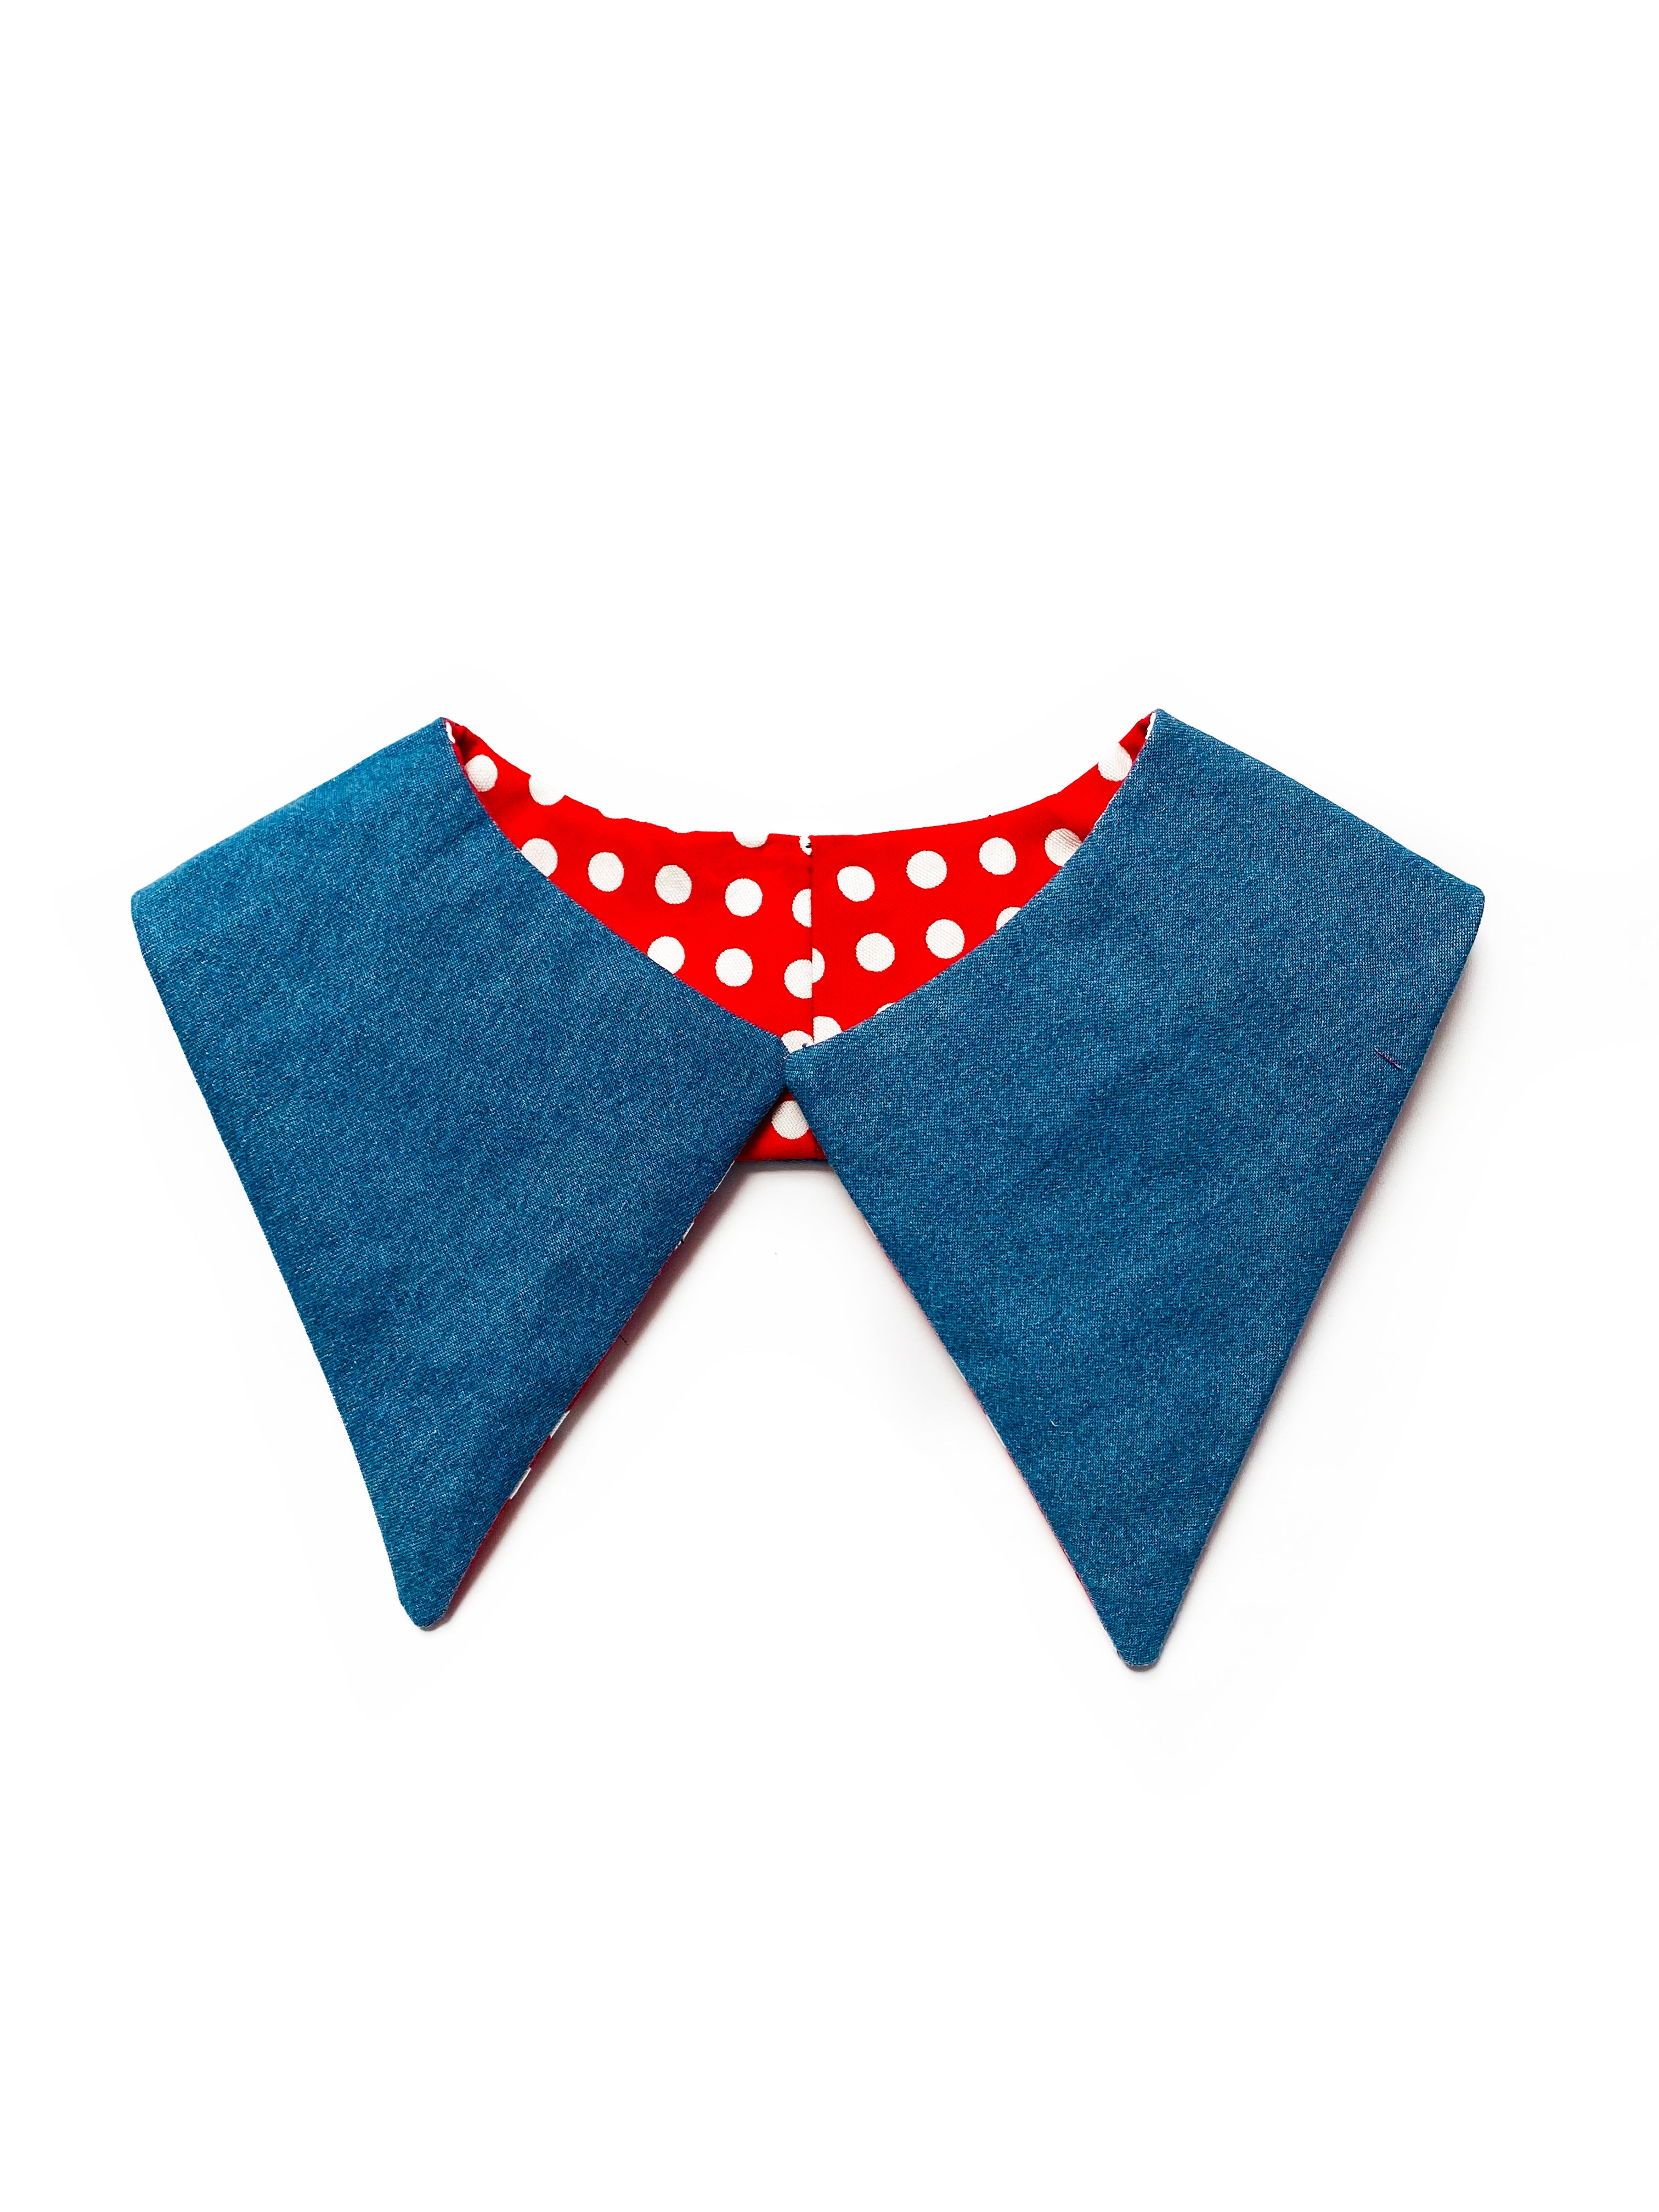 "Polka Dot Red" Detachable Collar - Late to the Party